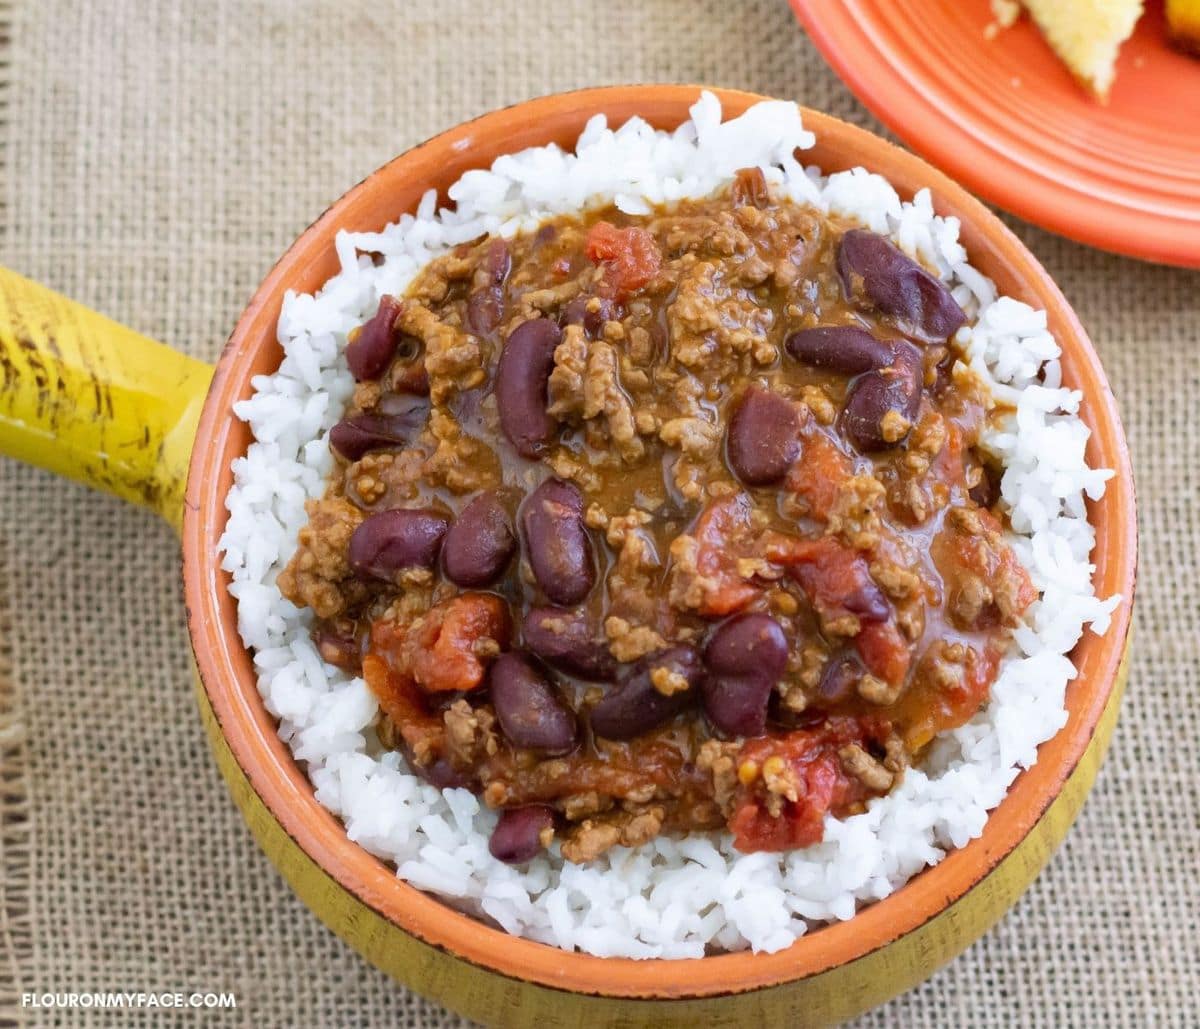 a crock style bowl filled with chili over white rice.